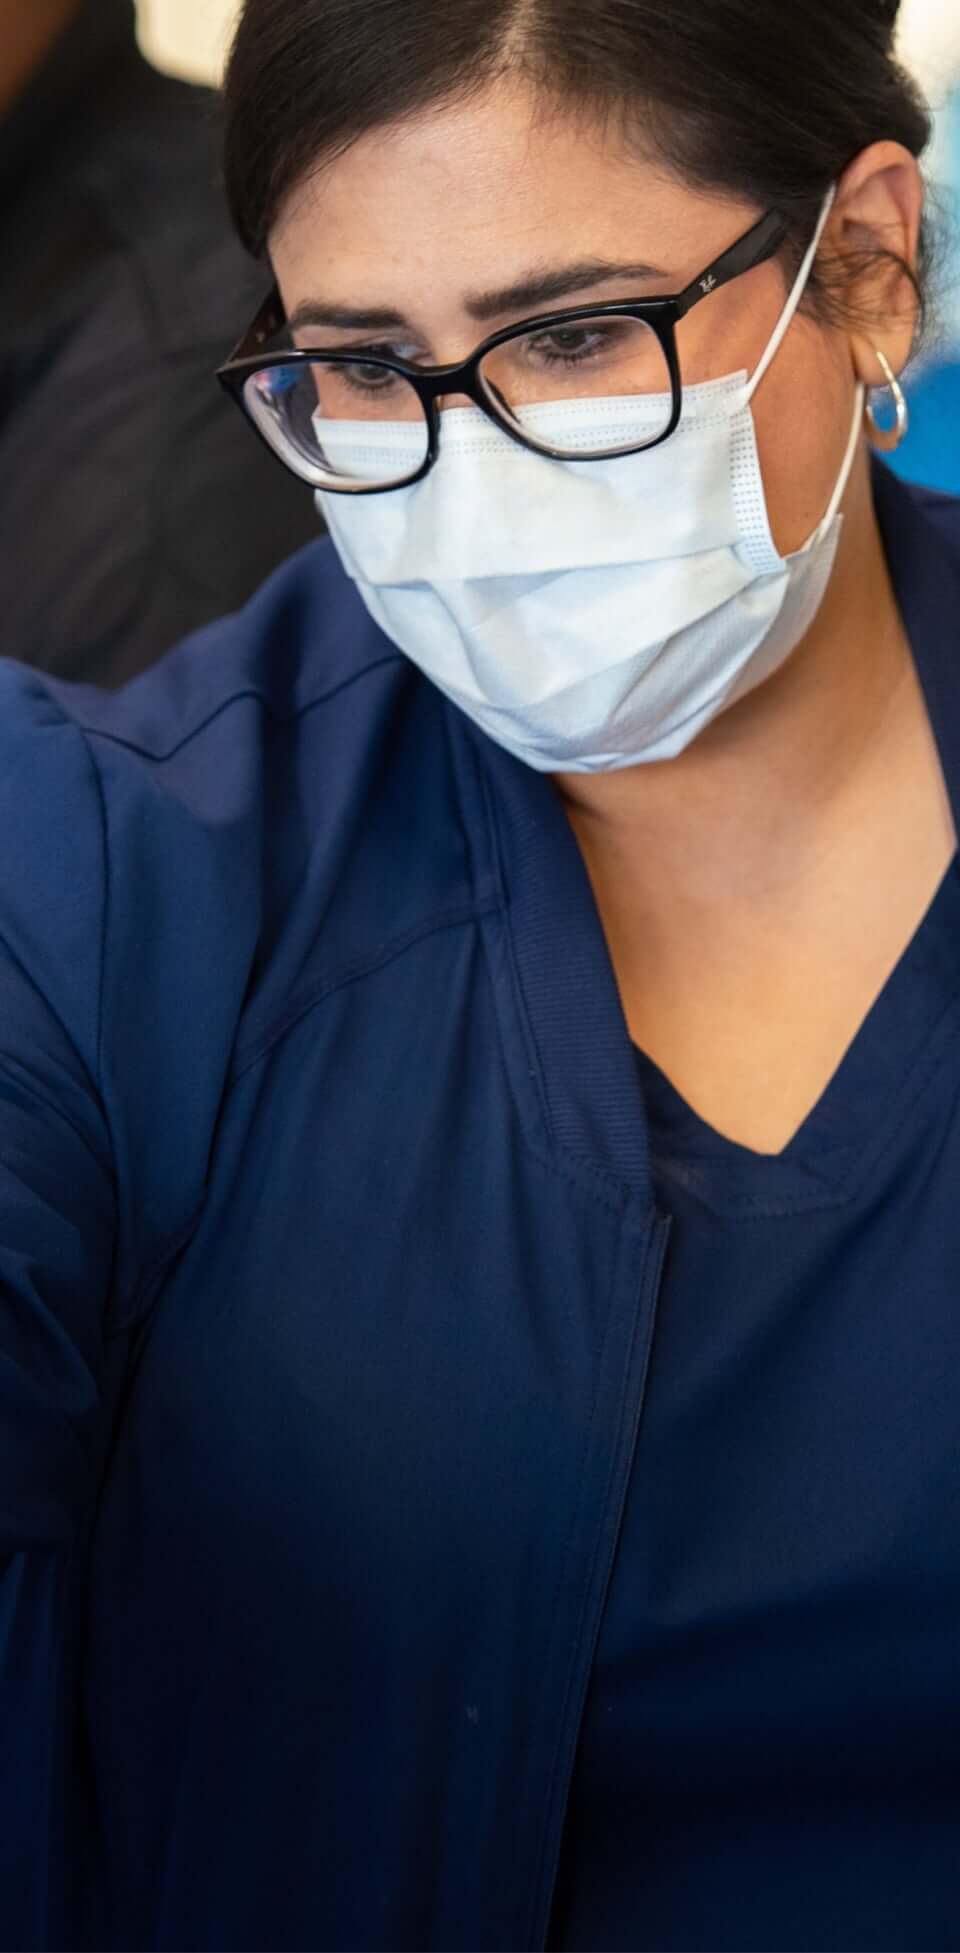 Female nurse looking at something on a screen